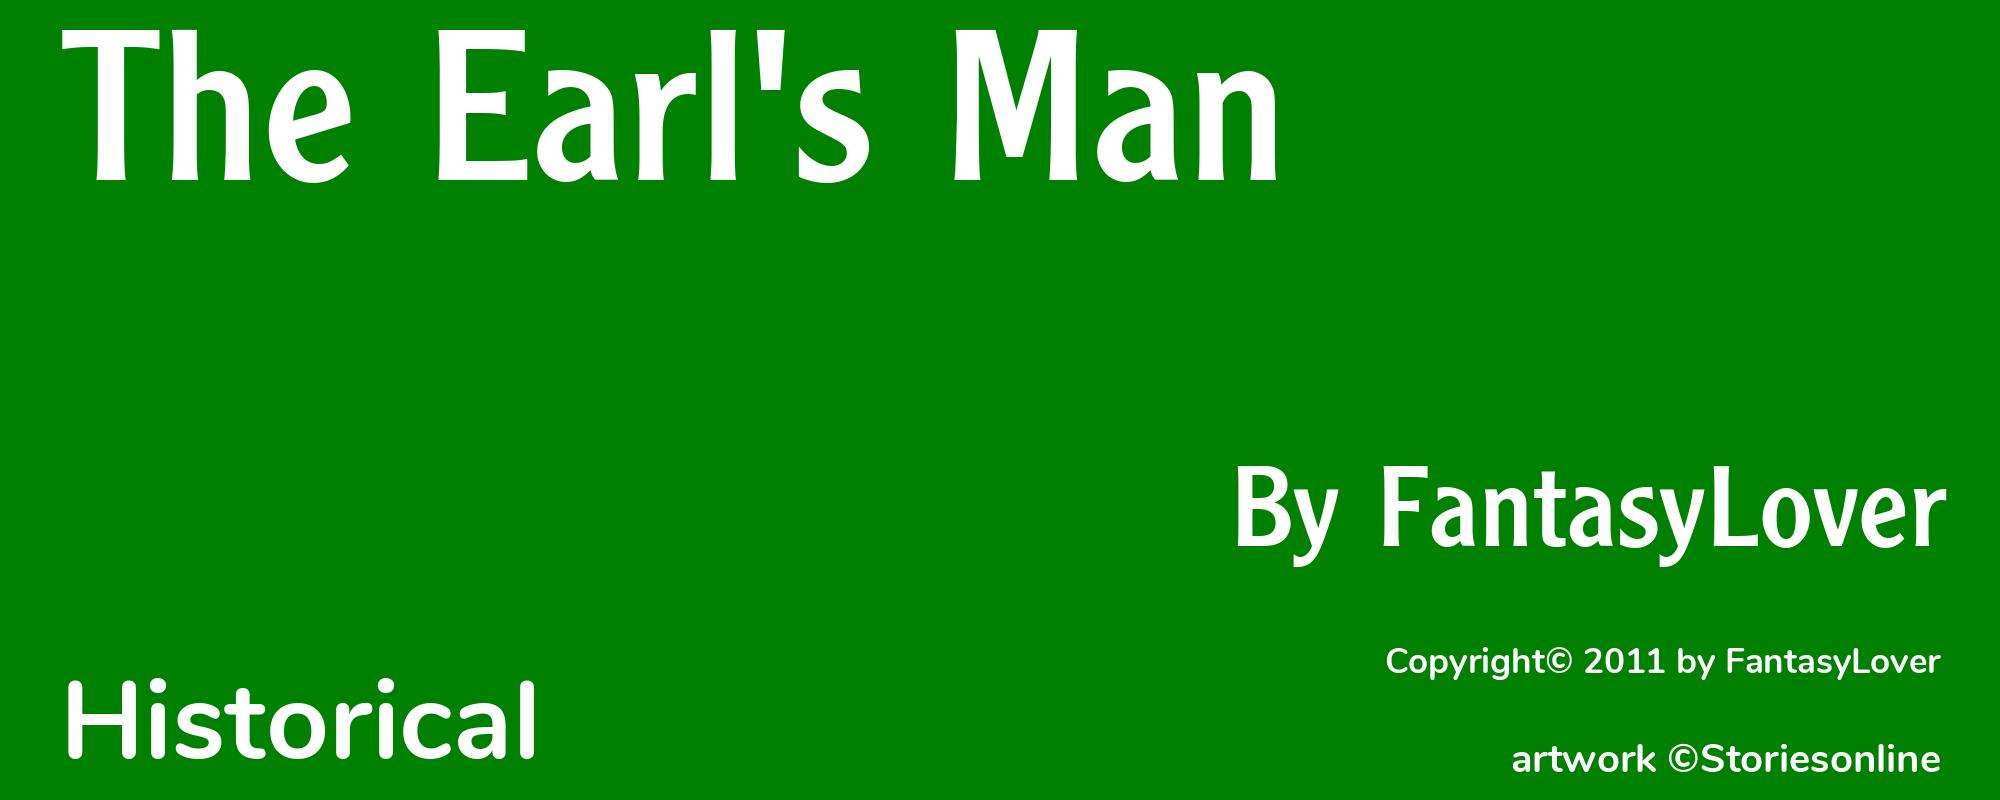 The Earl's Man - Cover